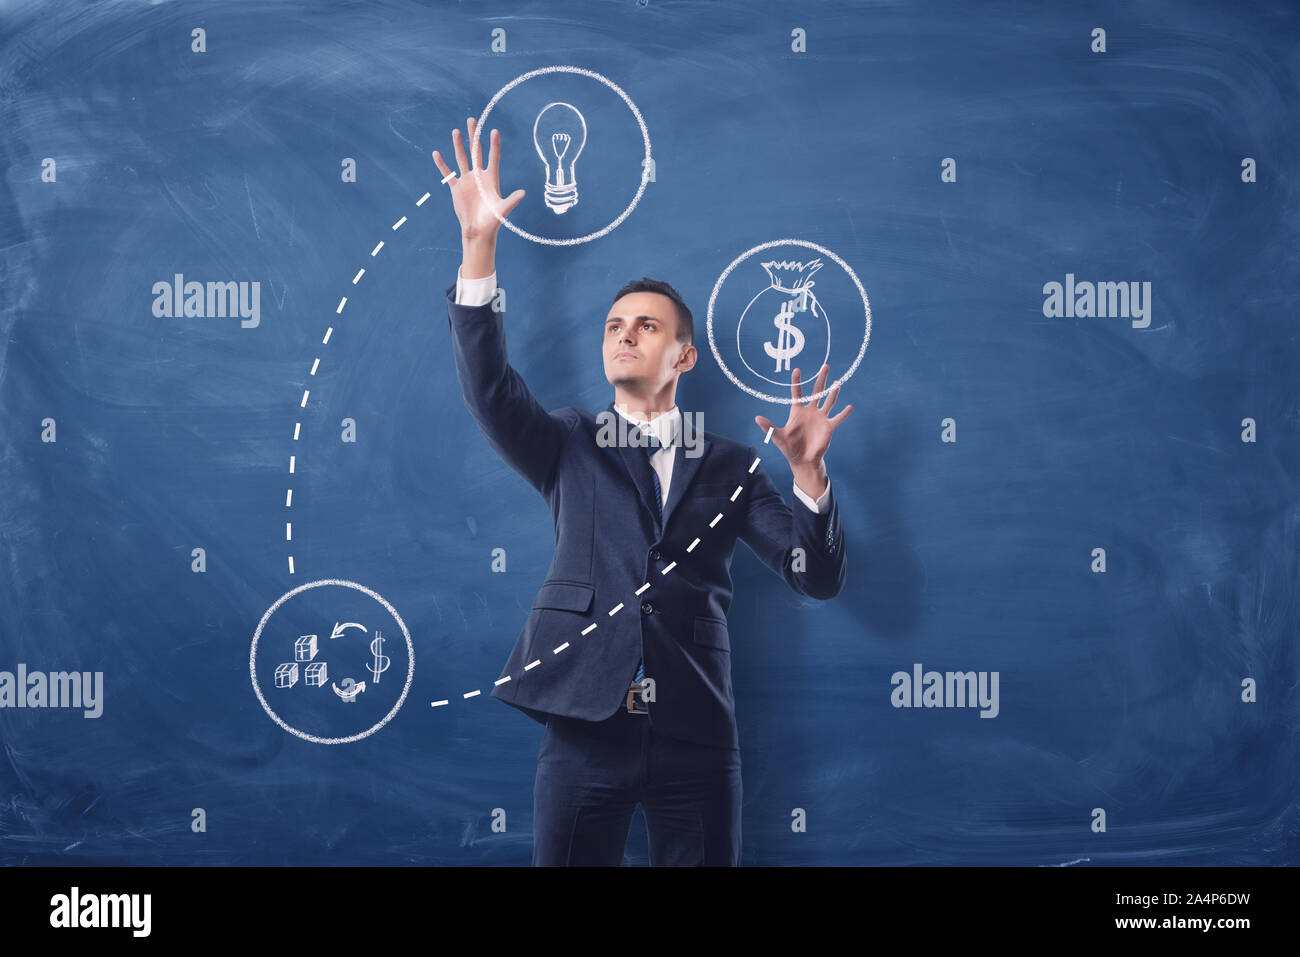 Businessman on blue chalkboard background manipulating white see-through icons that are connected with dash lines. Stock Photo